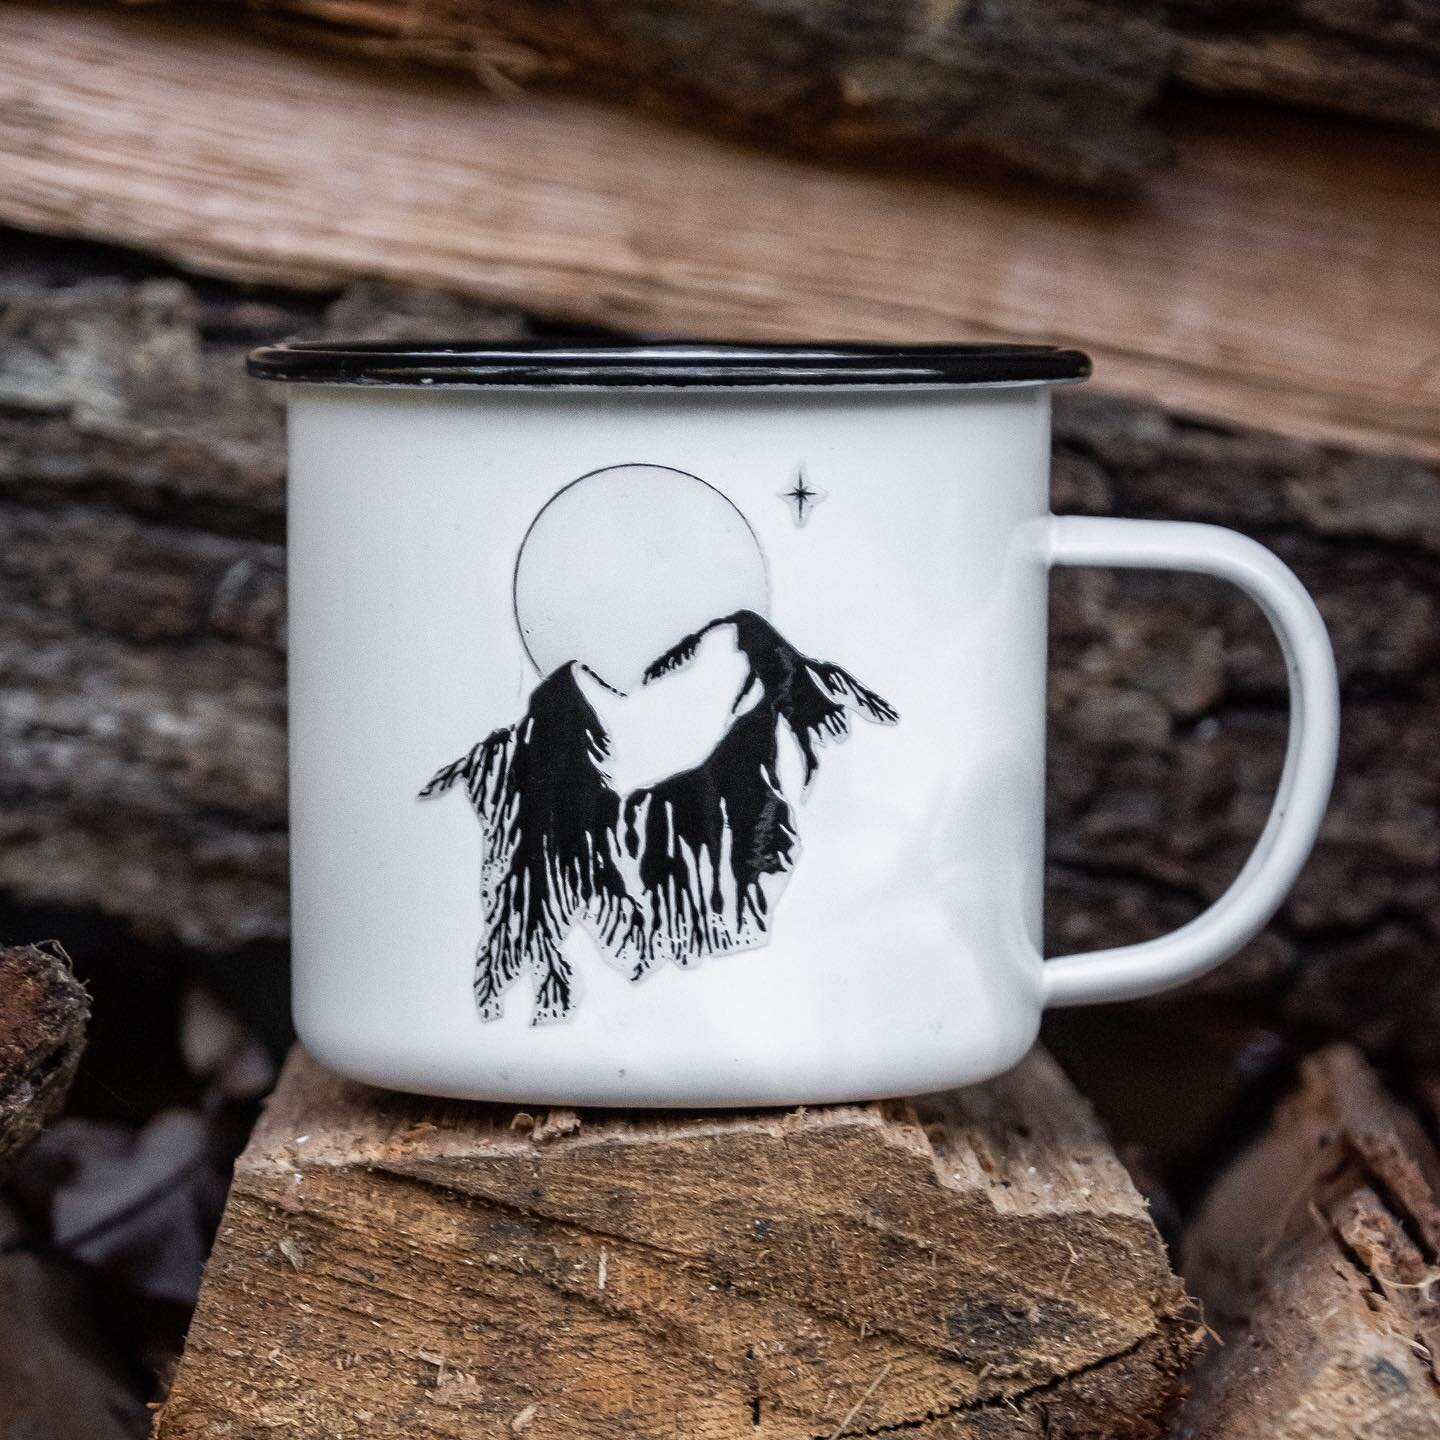 NEW Mountain Mugs! Available for Pre-Order in three colors: swipe to see and tap to shop! ⛰💫
.
Local pickup is available for my North Georgia neighbors! (See listing for more info.)
.
#blackandwhiteart #highcontrast #blackwork #simplycooldesign #vis